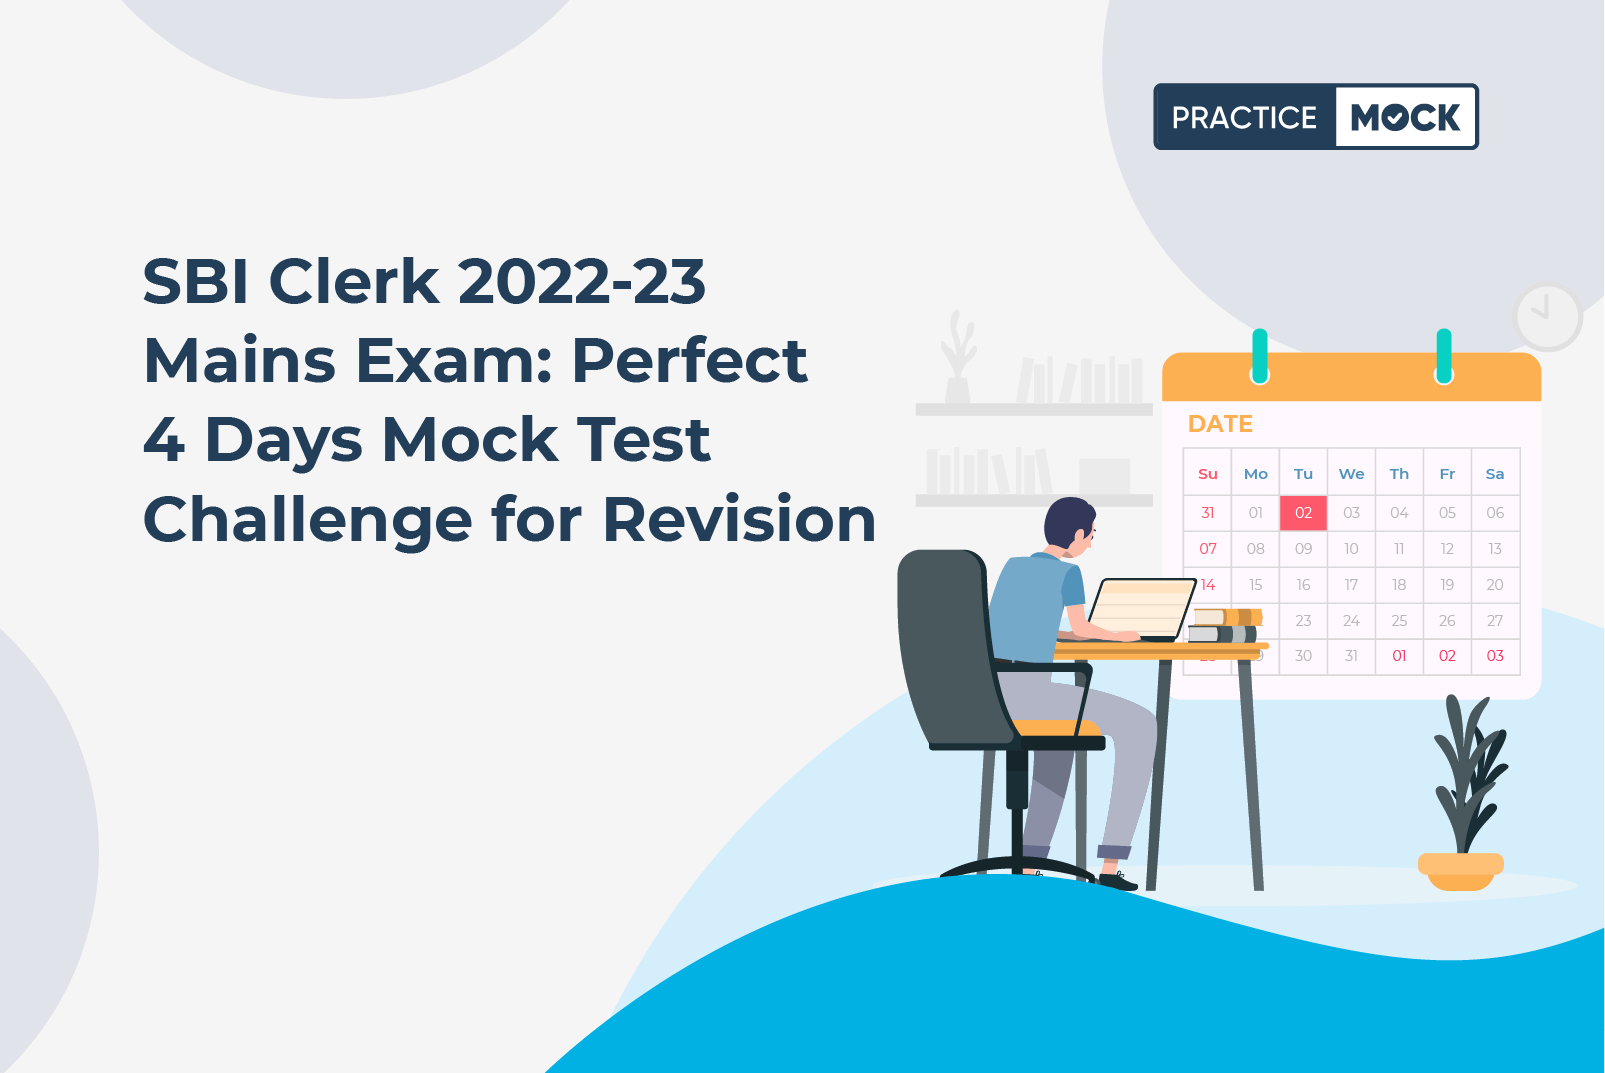 SBI Clerk 2022 Mains Exam: Perfect 4 Days Mock Test Challenge for Revision